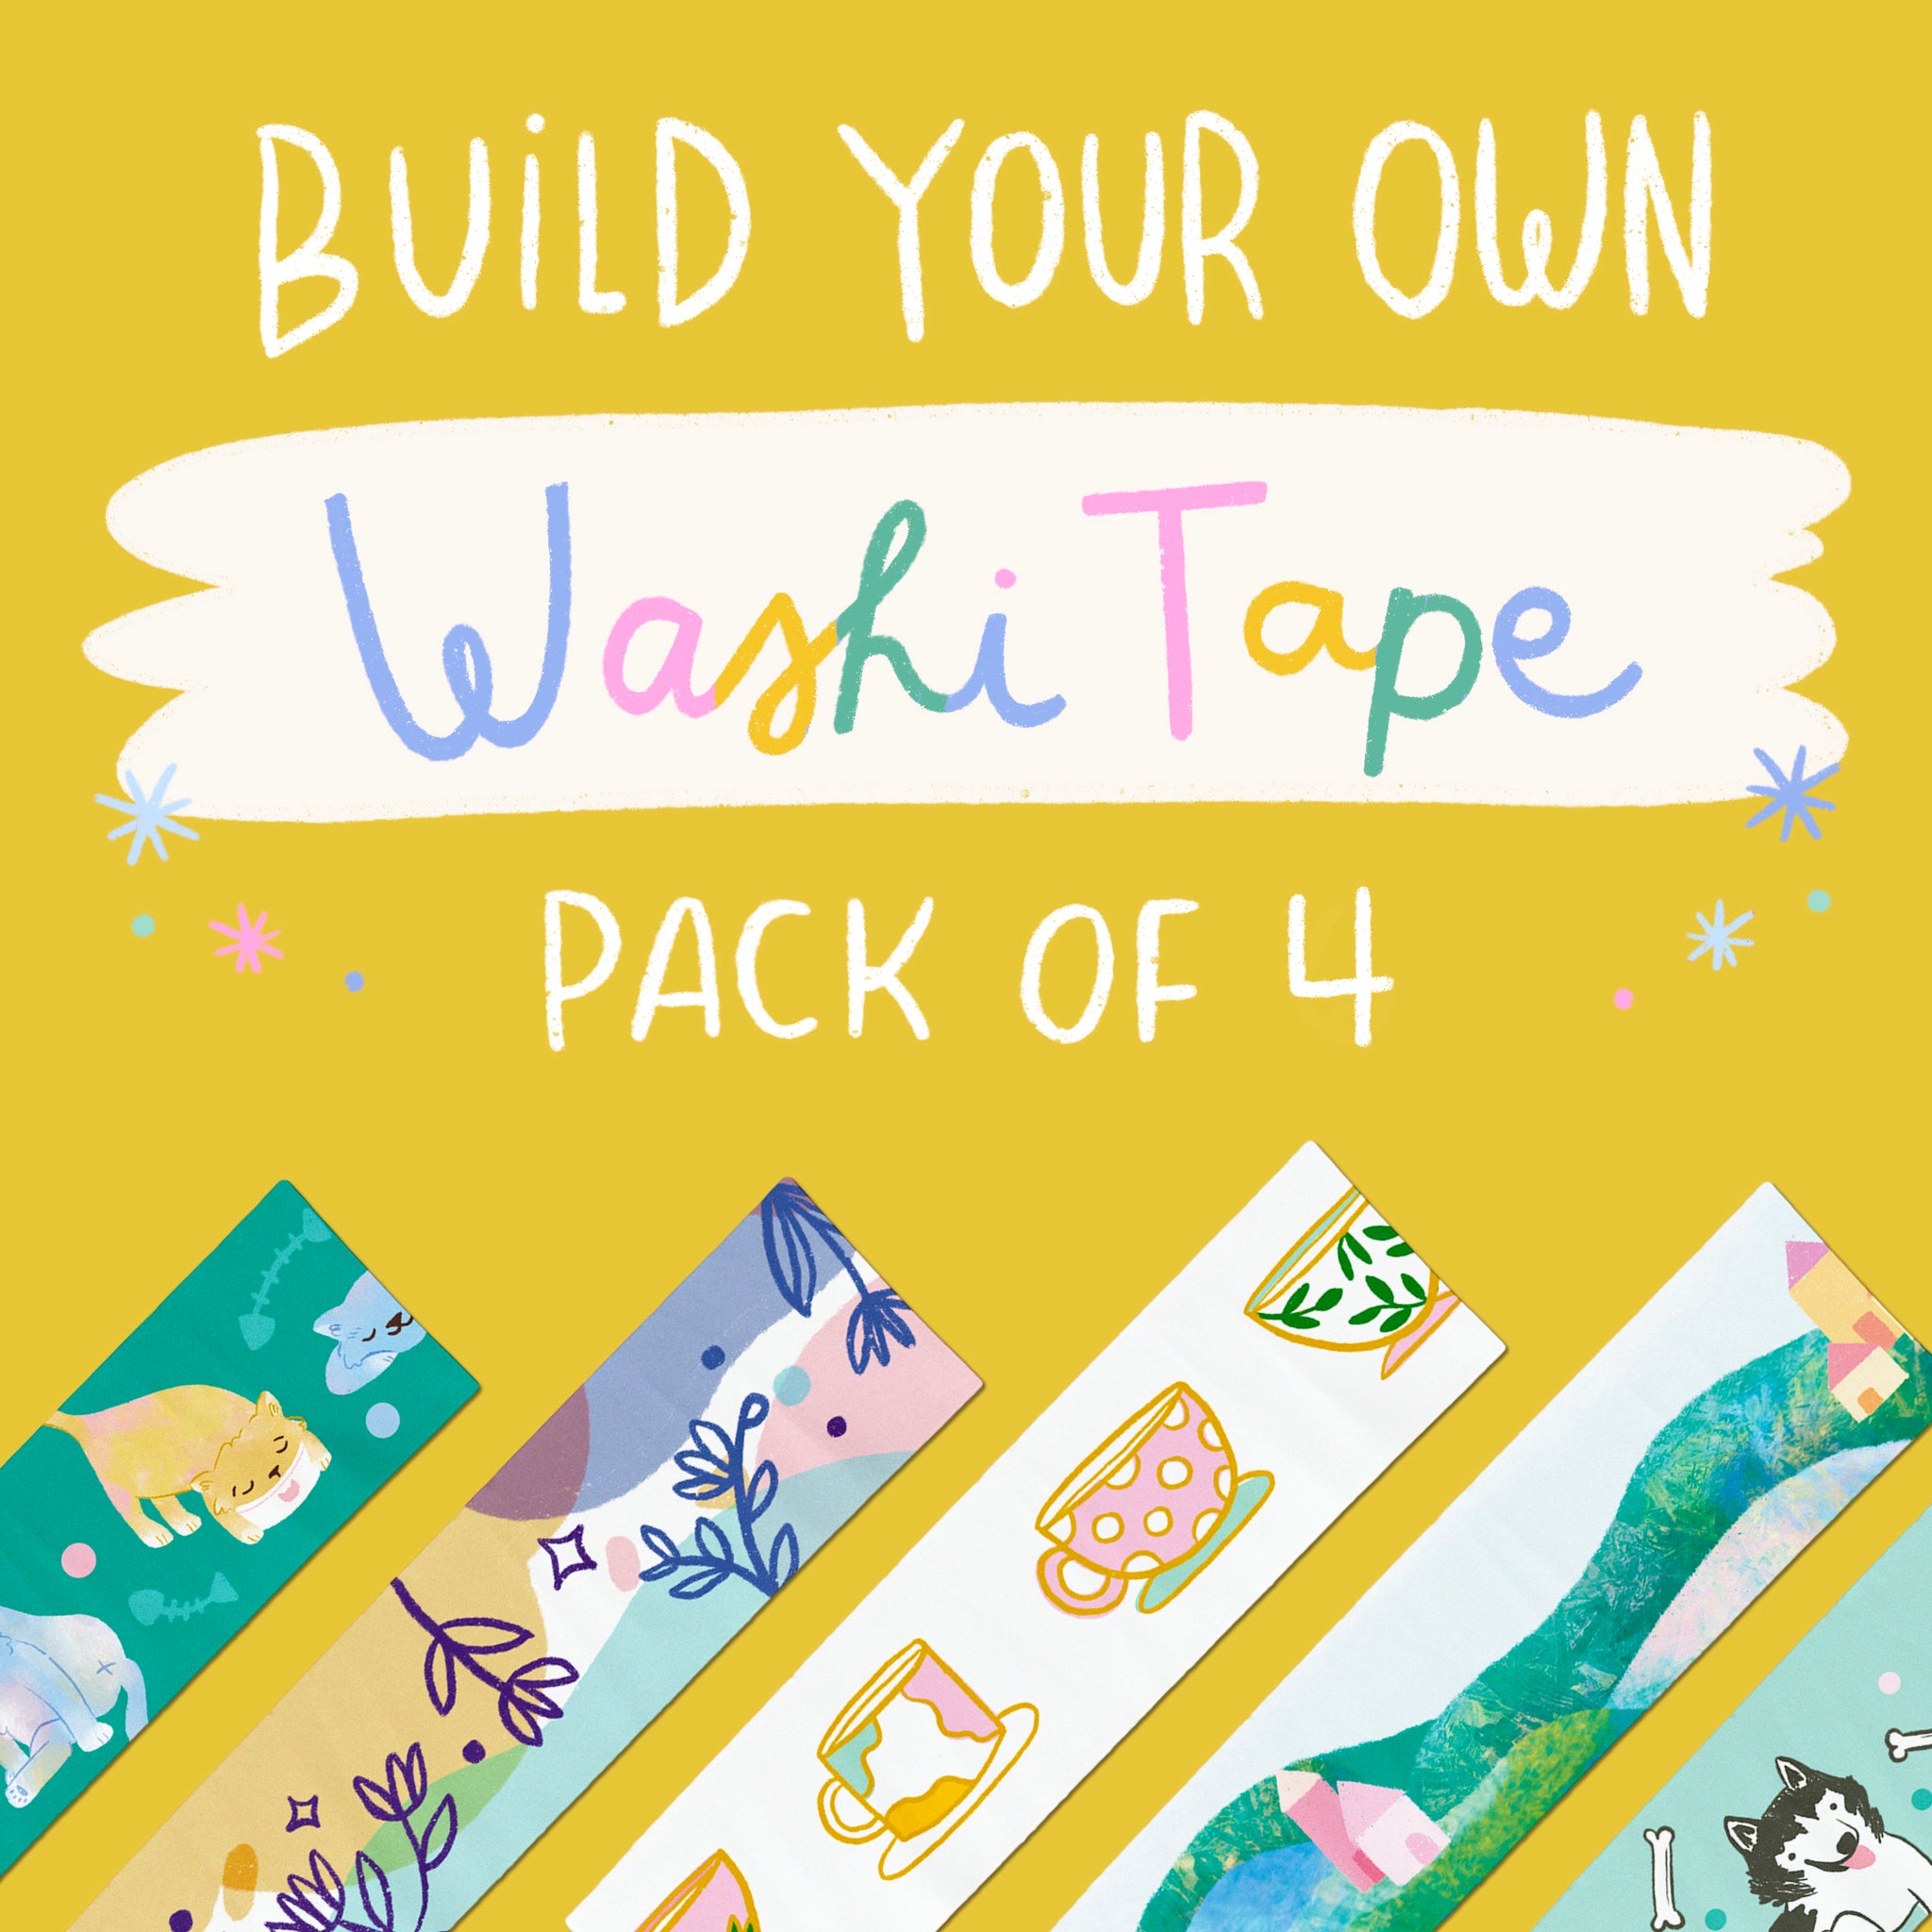 Build Your Own Washi Tape Pack of 4 | Washi Tape | Decorative Tape